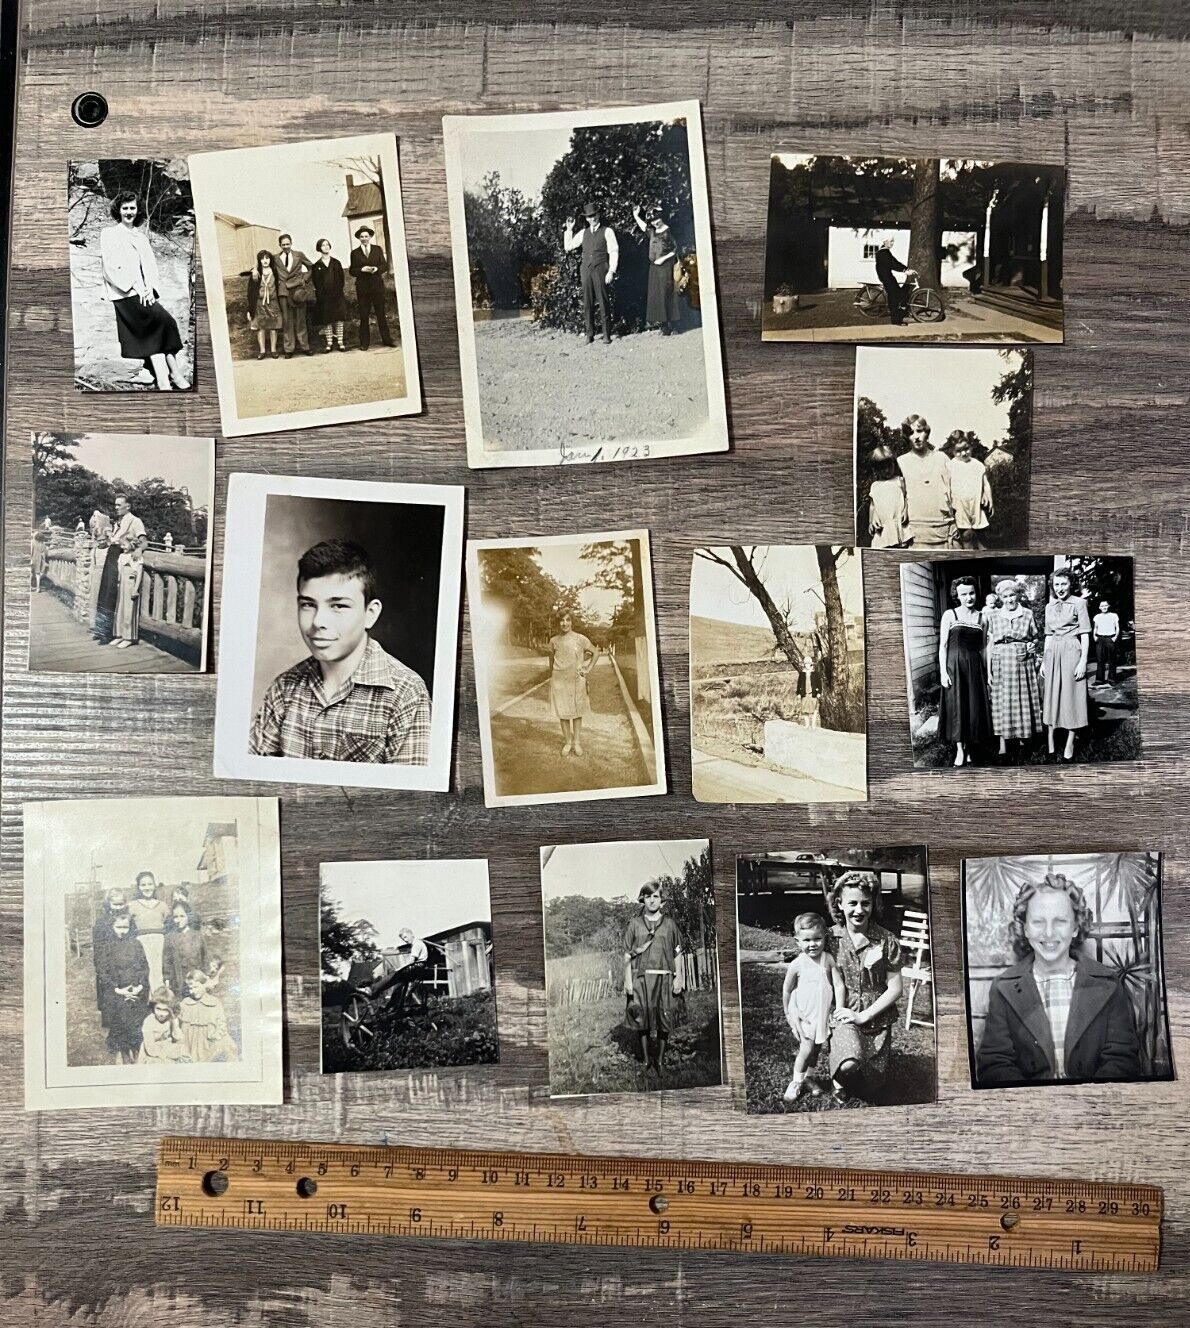 Lot of 35 Vintage 1920's - 1950's Rural Country Farm Family Life USA B&W Photos